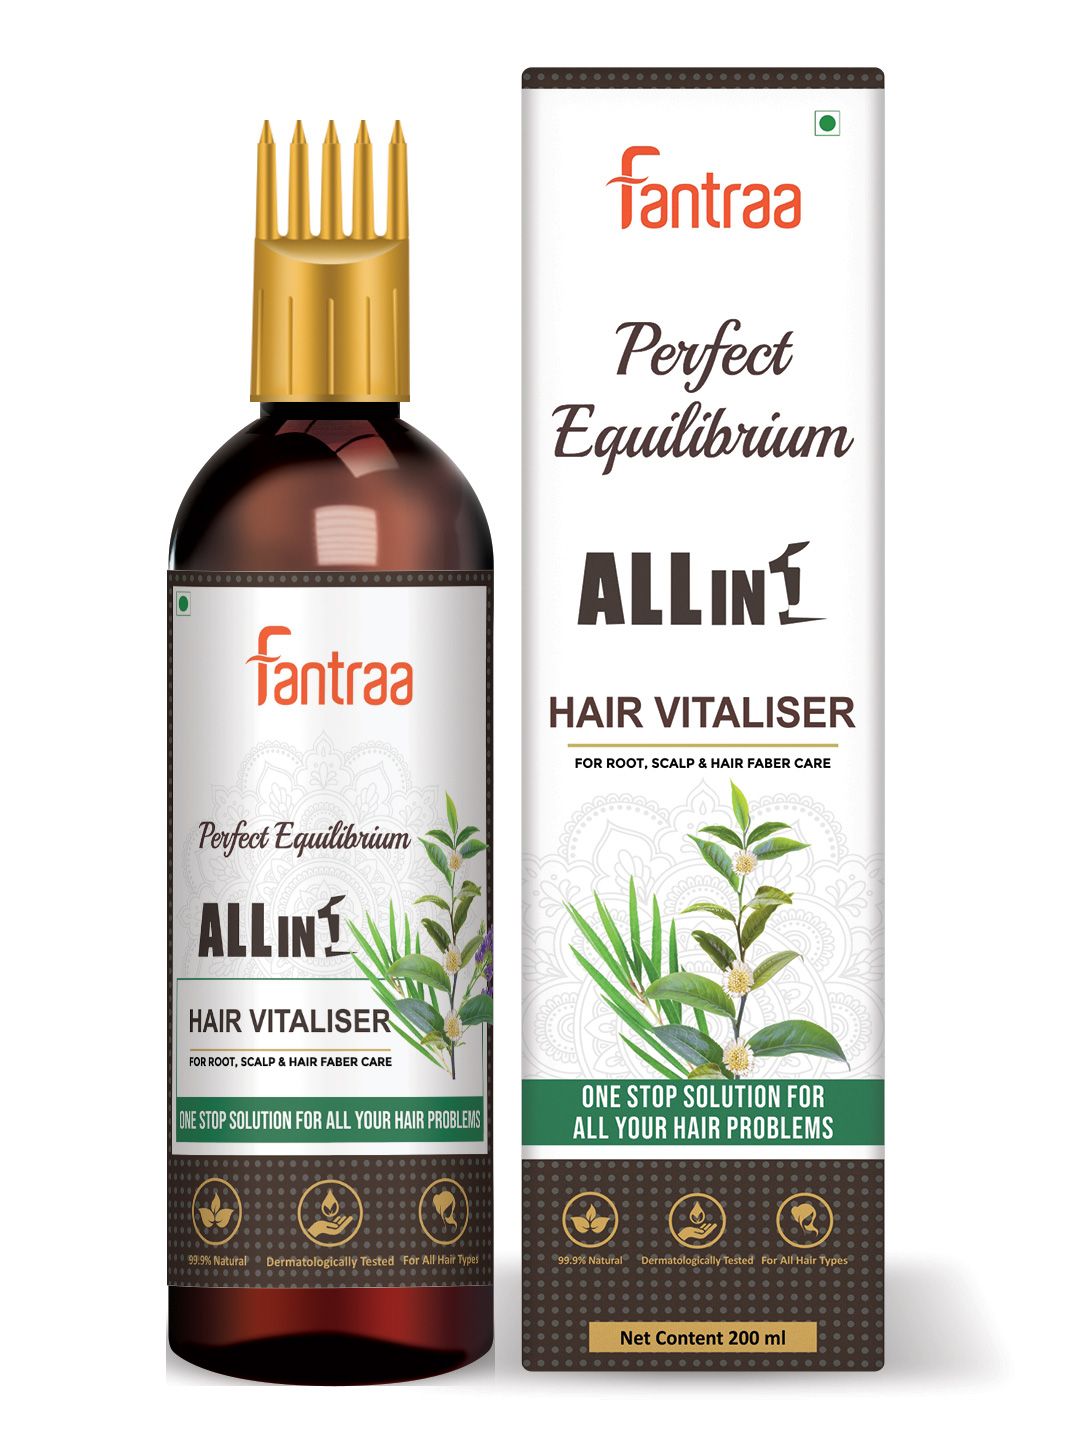 Fantraa Perfect Equilibrium All In 1 Hair Vitaliser Oil - 200 ml Price in India